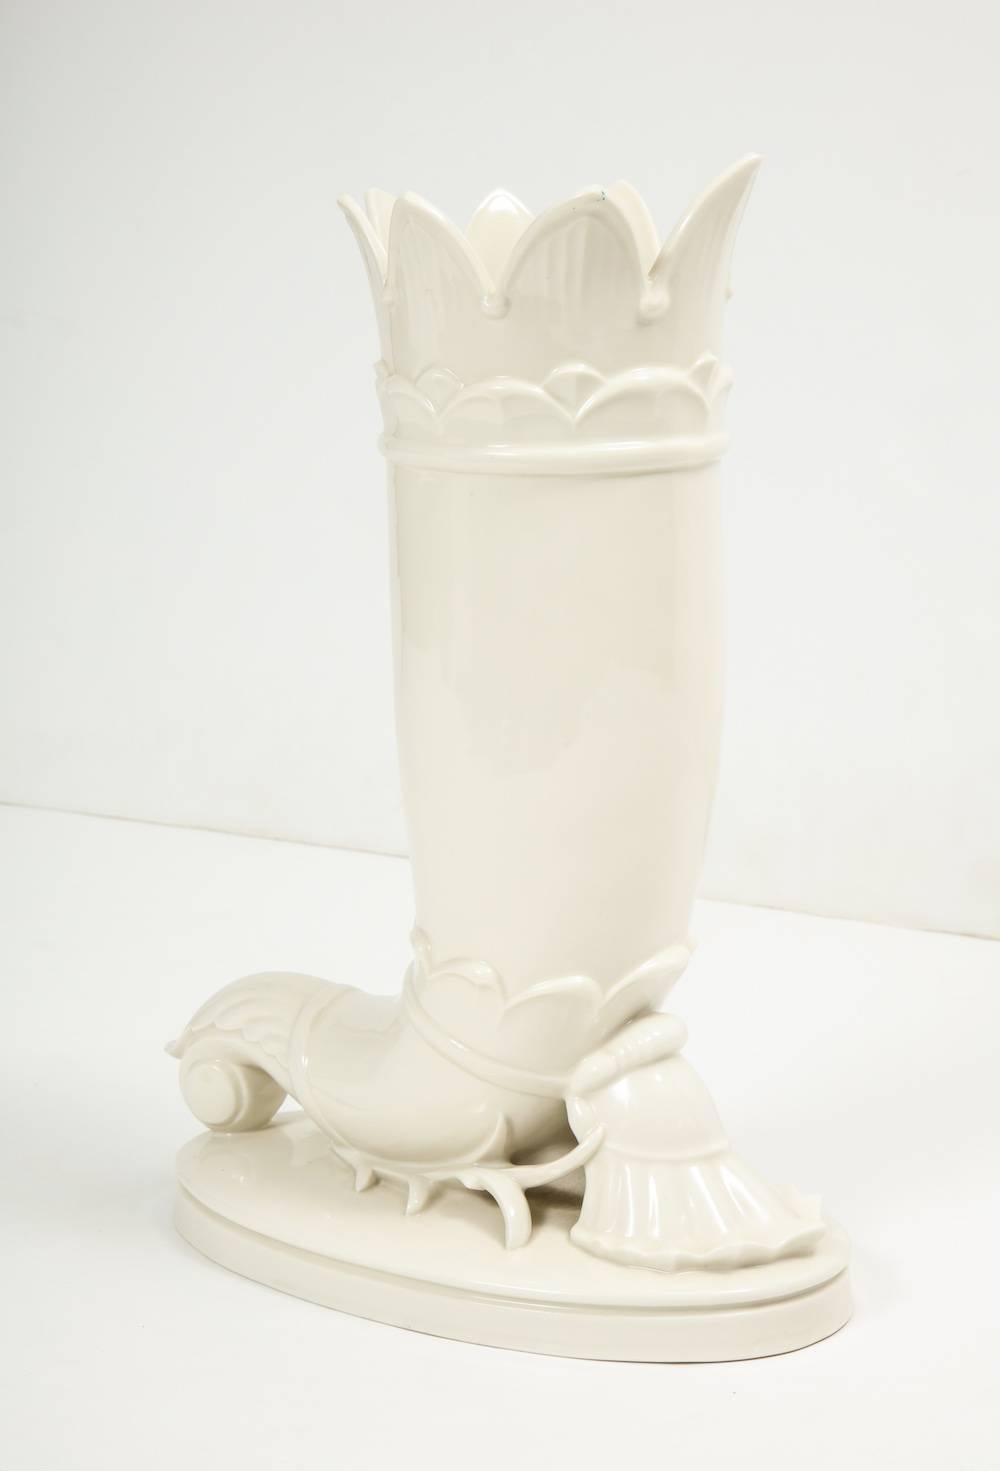 Early Porcelain vase by Schwarzburger Werkstätten.
Well crafted porcelain vase with Classic decorative motif and low pedestal base. 
Manufacturers signature on underside.